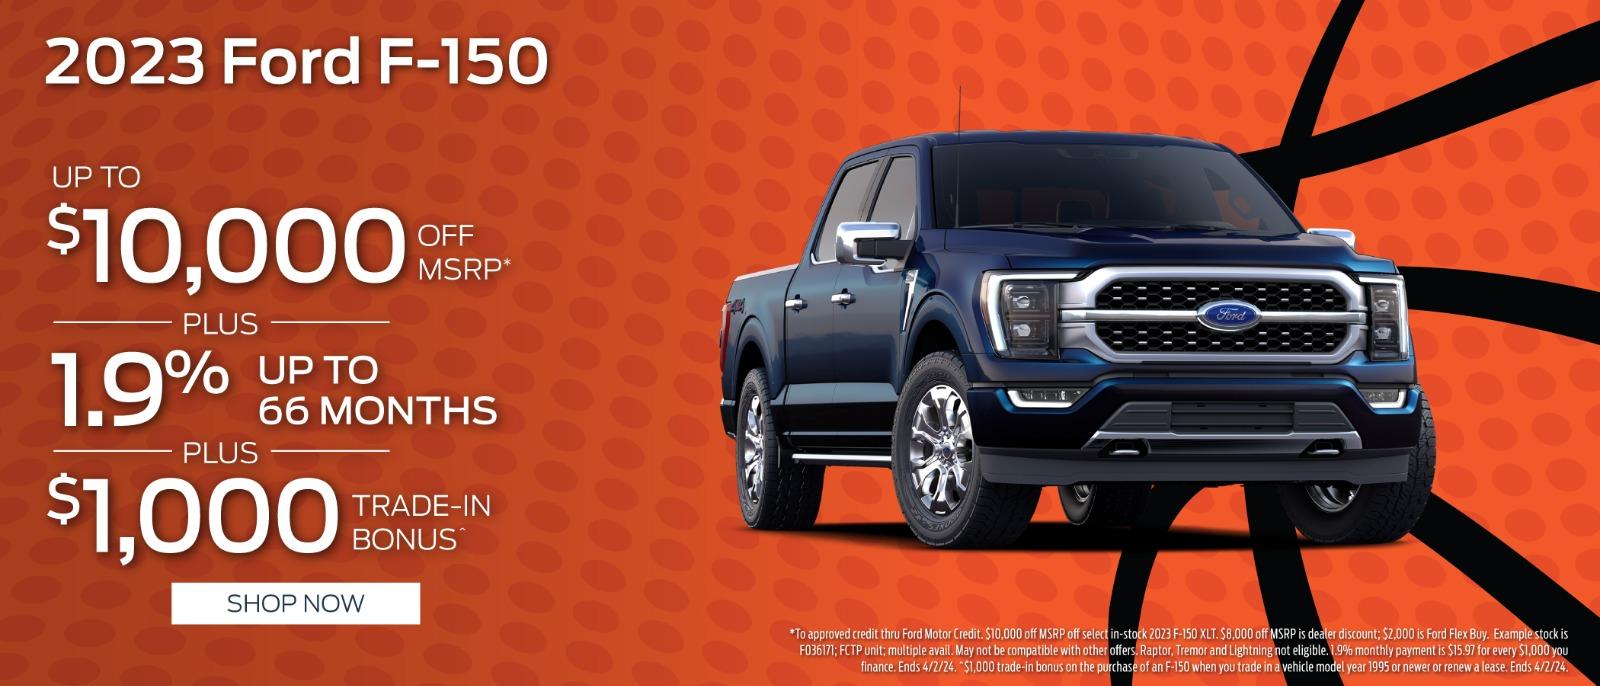 2023 Ford F-150 1.9% up to 66 months